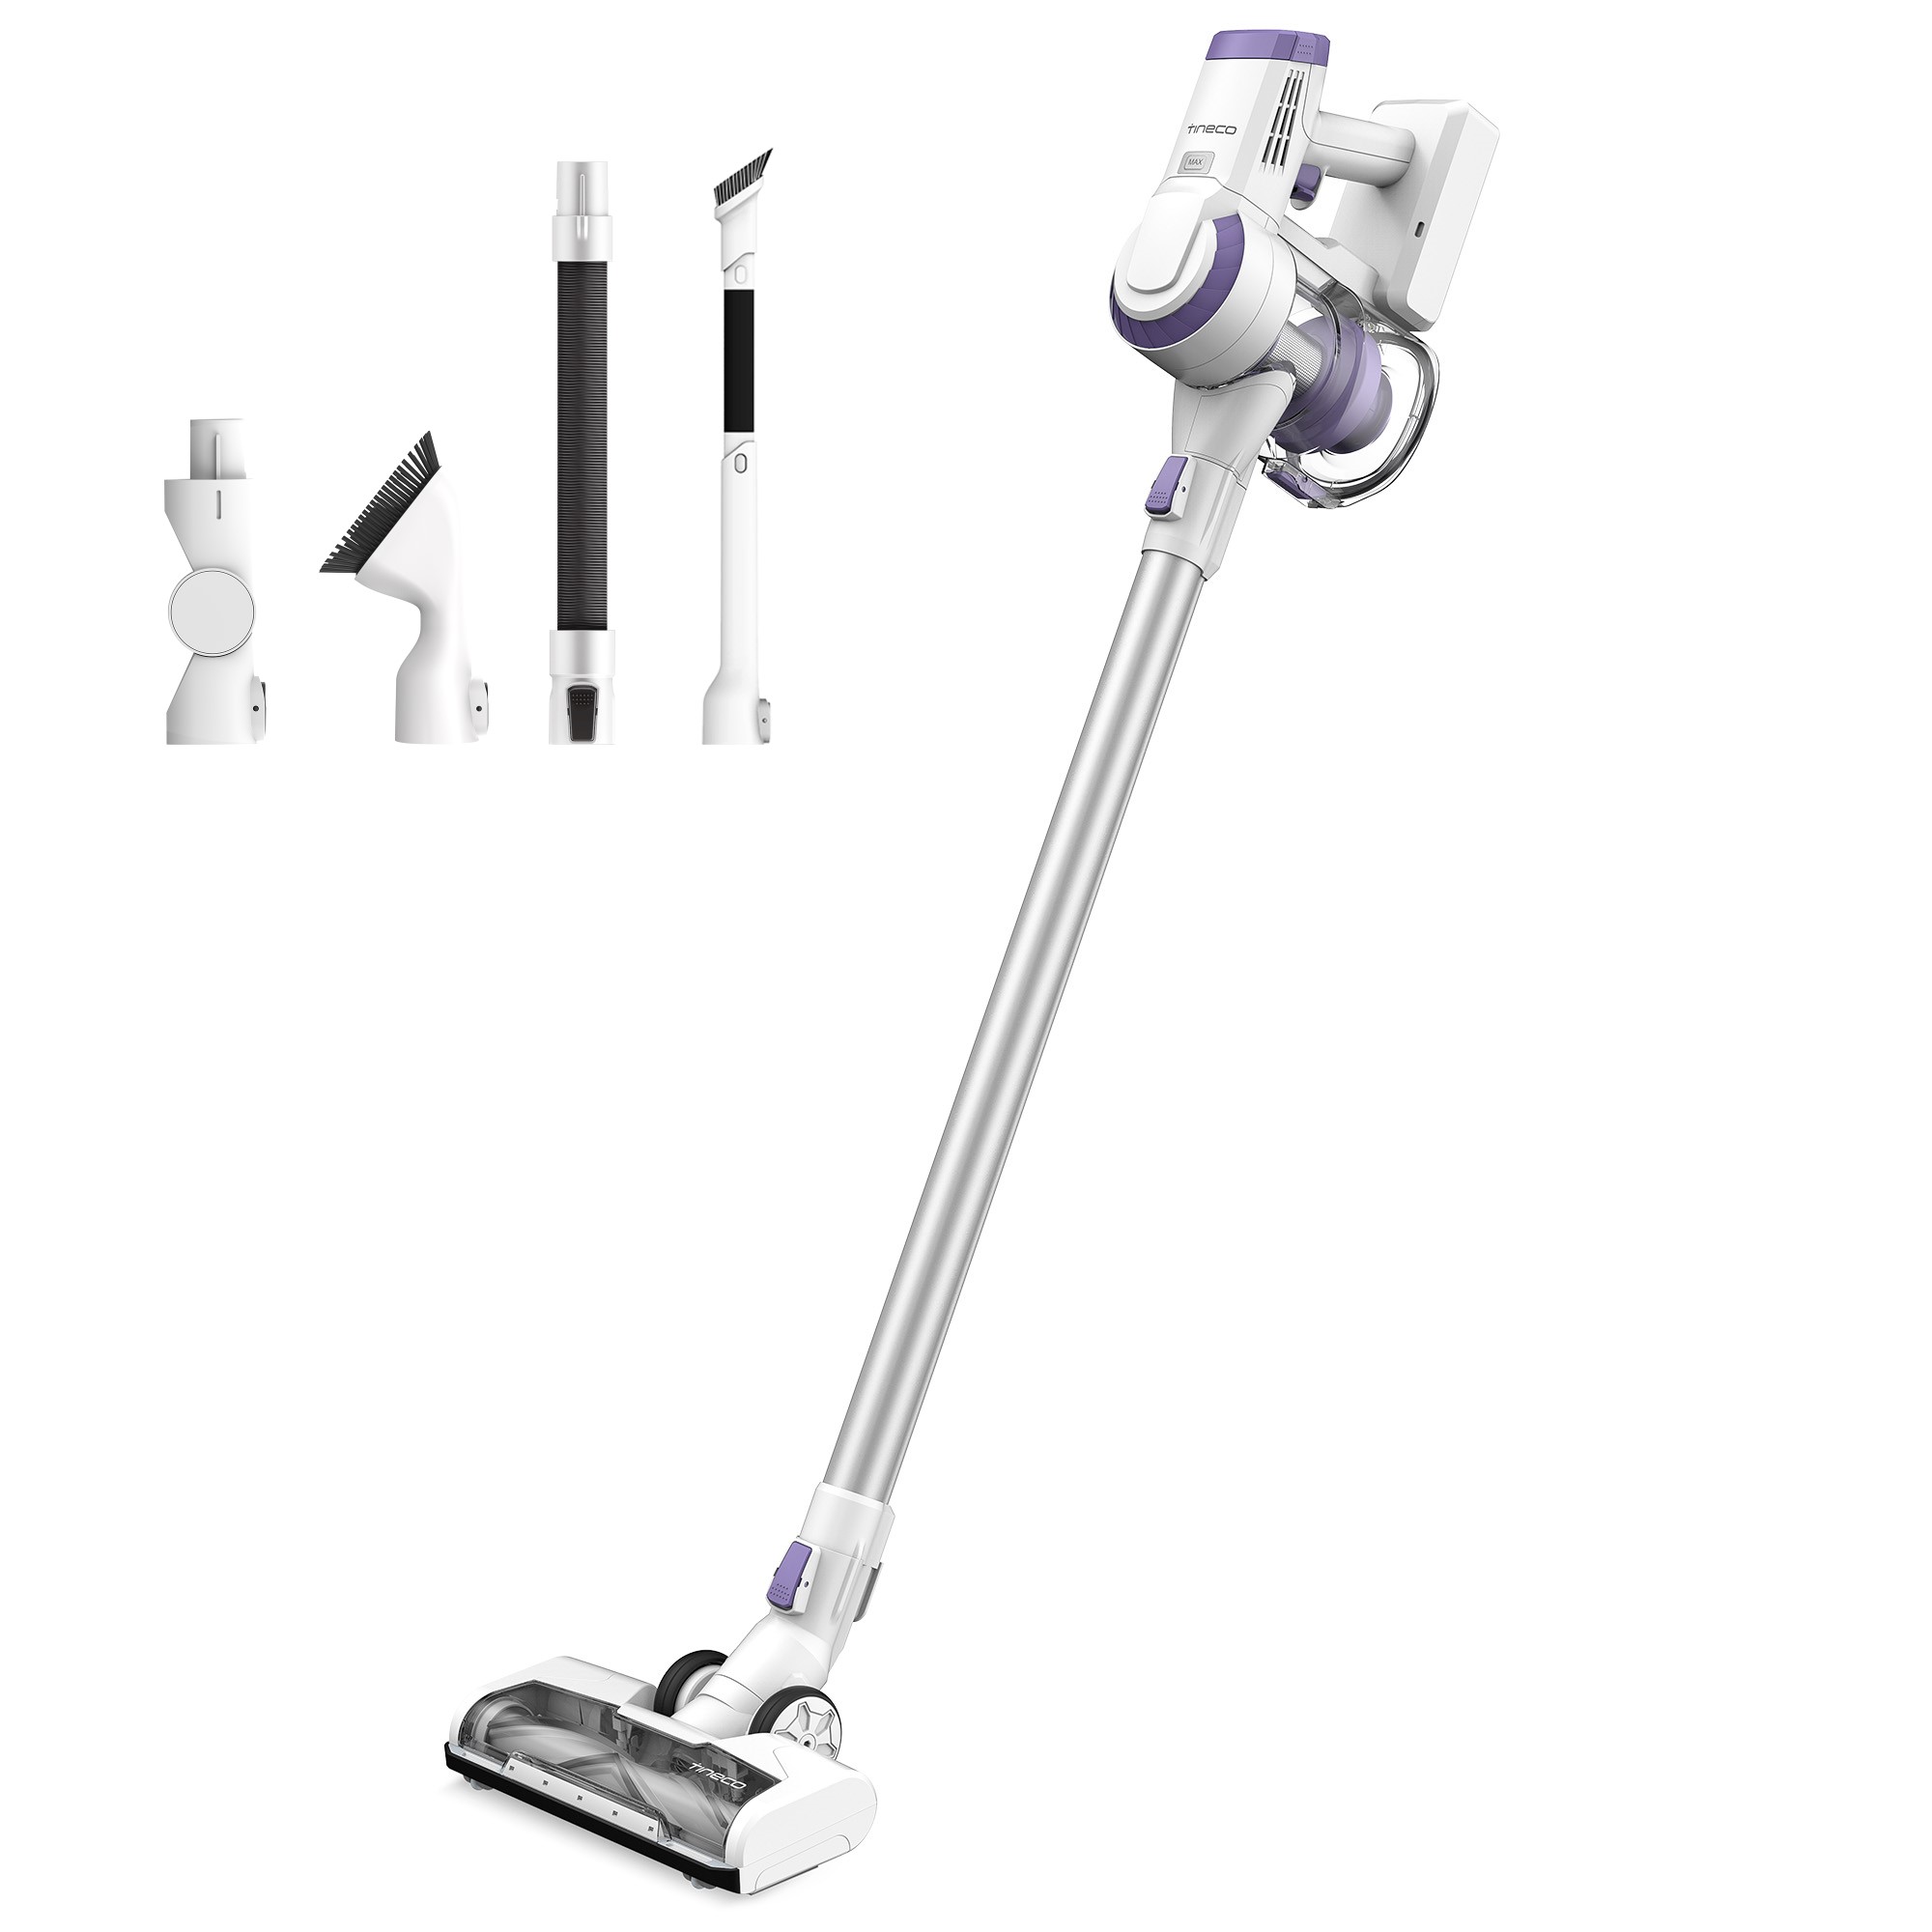 Tineco A10-D Plus Flex - Cordless Ultralight Stick Vacuum Cleaner for Hard Floors and Low-Pile Rugs with Additional Accessory Kit - image 1 of 8